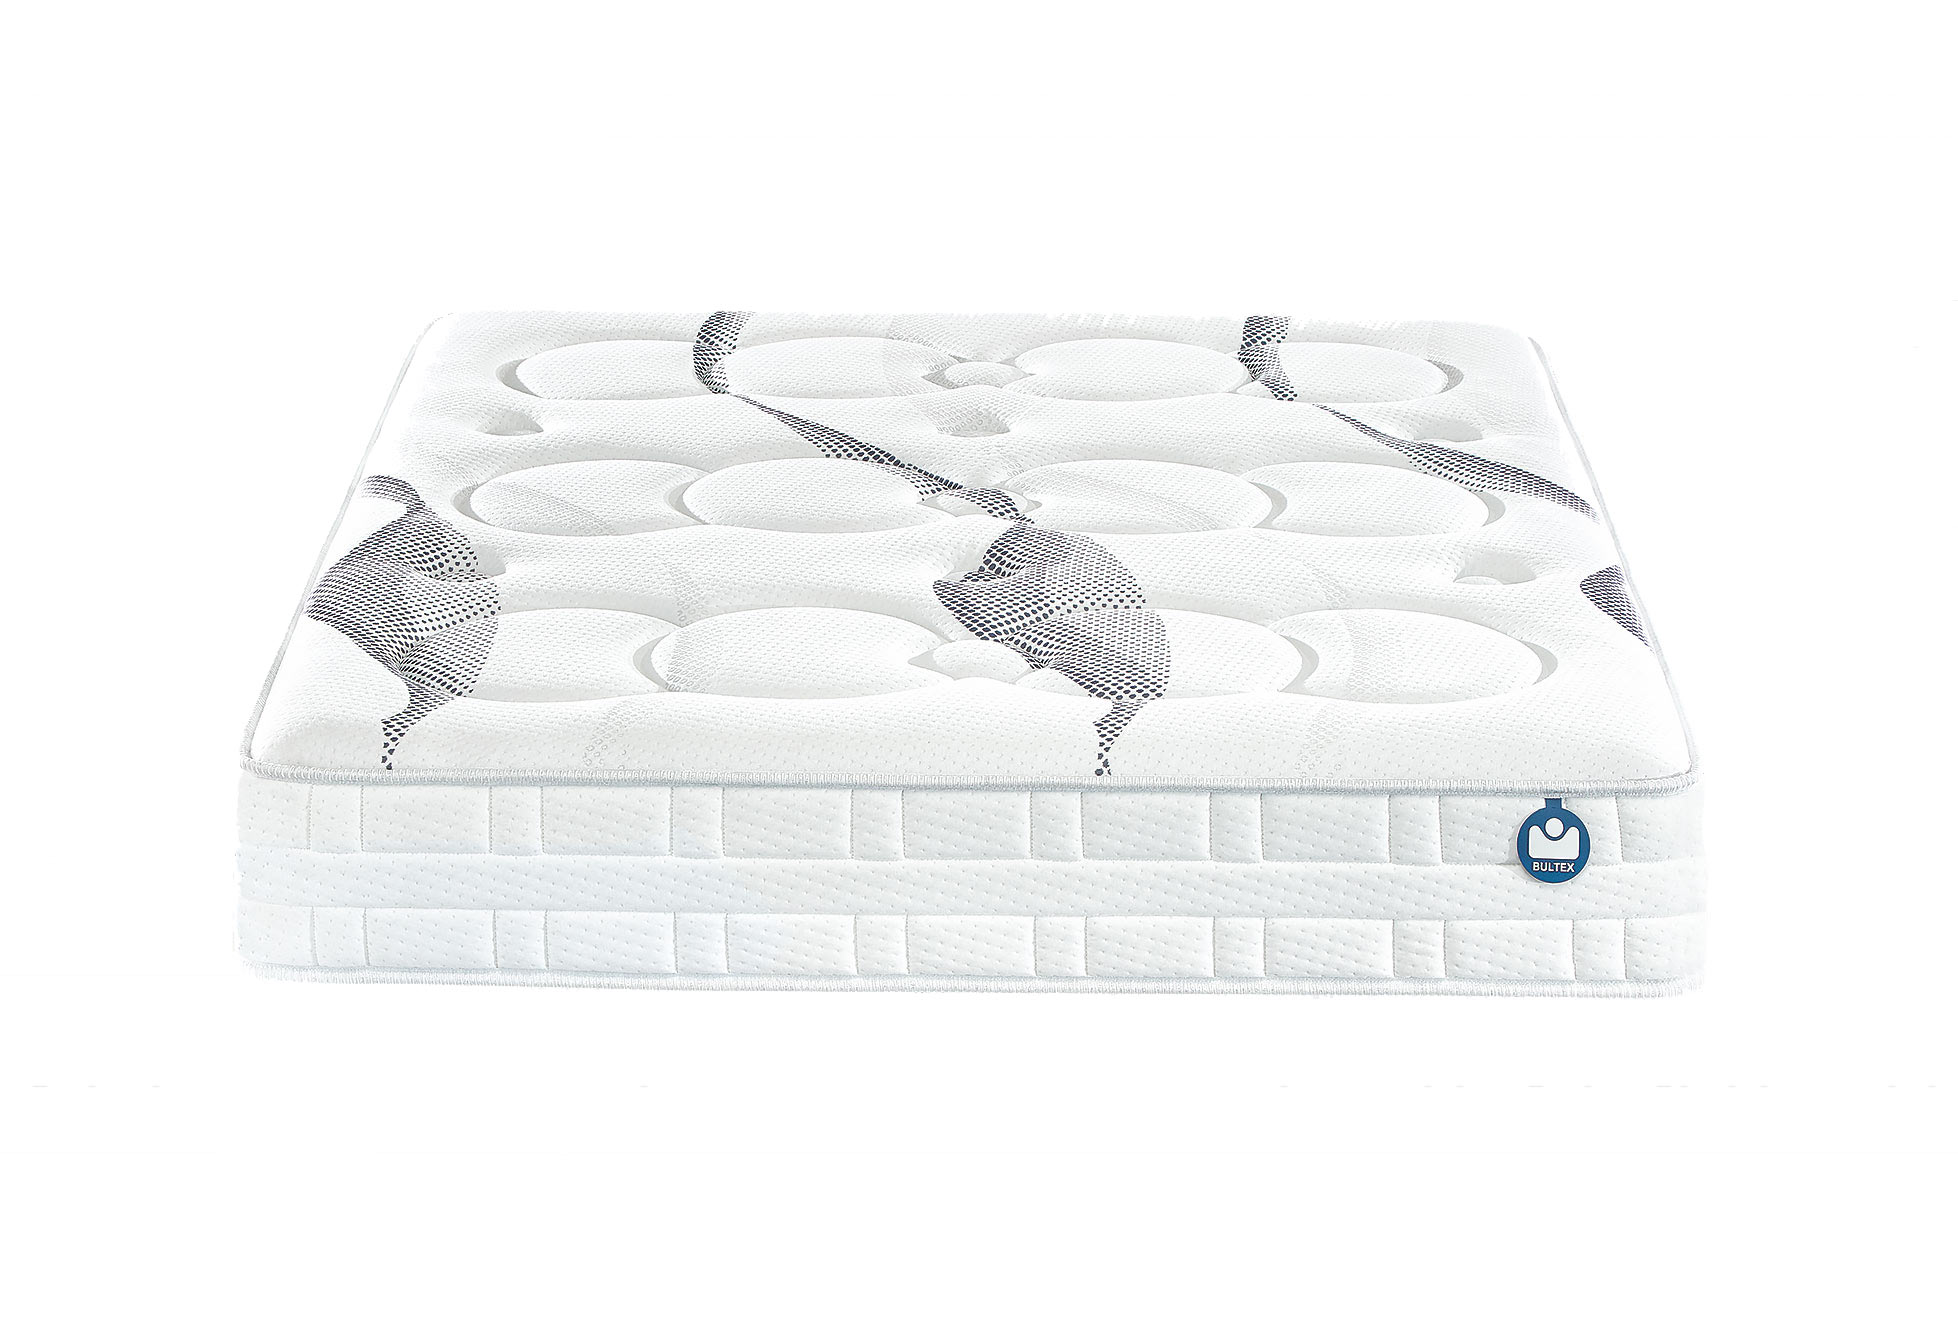 Matelas Mousse Bultex NEATNESS  140x190 (2 pers)